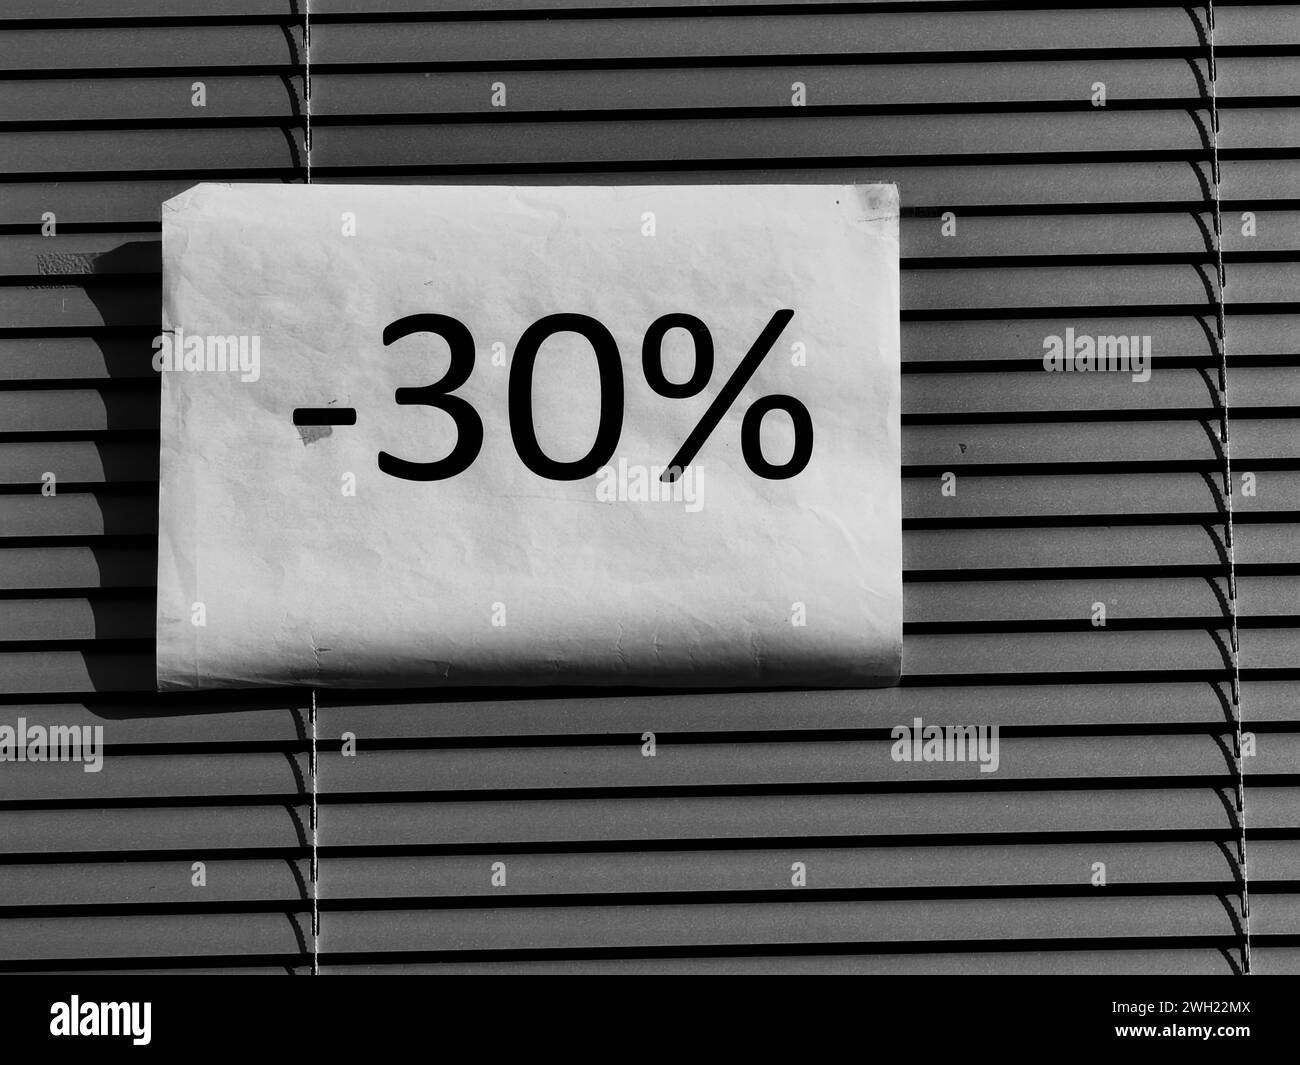 30  % sale discount. Shopping time. Sunlit s blinds cover. Protection. Store expose. Sales event. Stock Photo